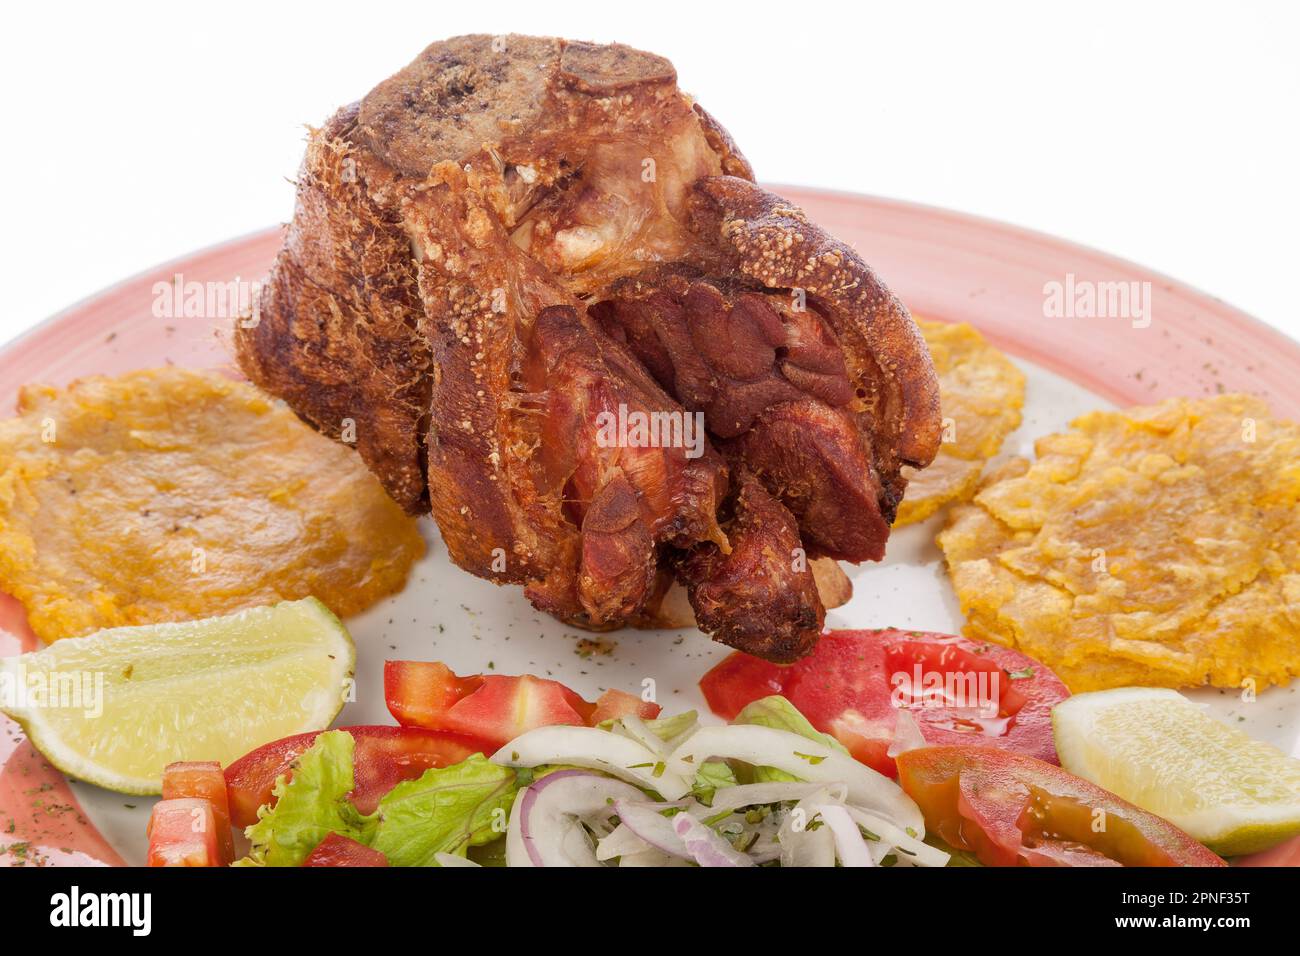 Fried Pork Knuckle With Salad And Patacones. Stock Photo